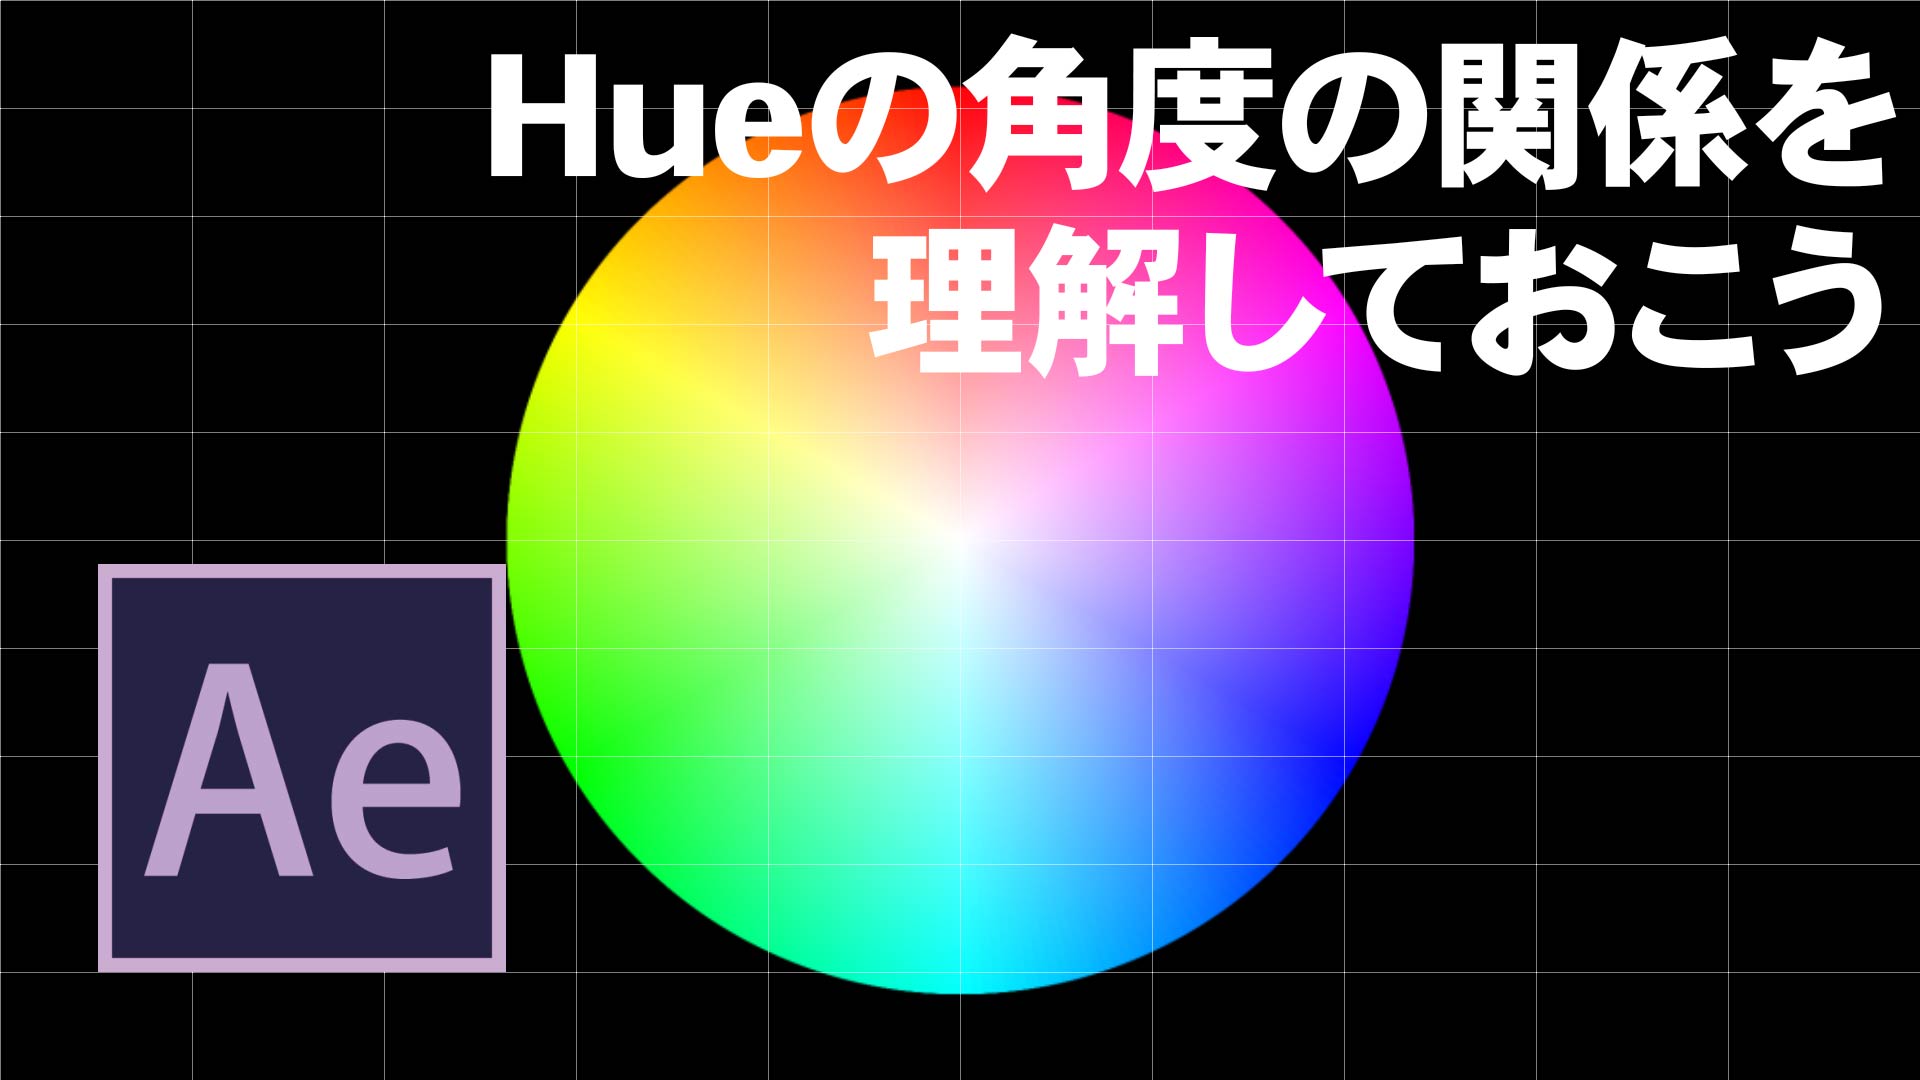 [After Effects]Hueの角度はビジュアルで覚よう